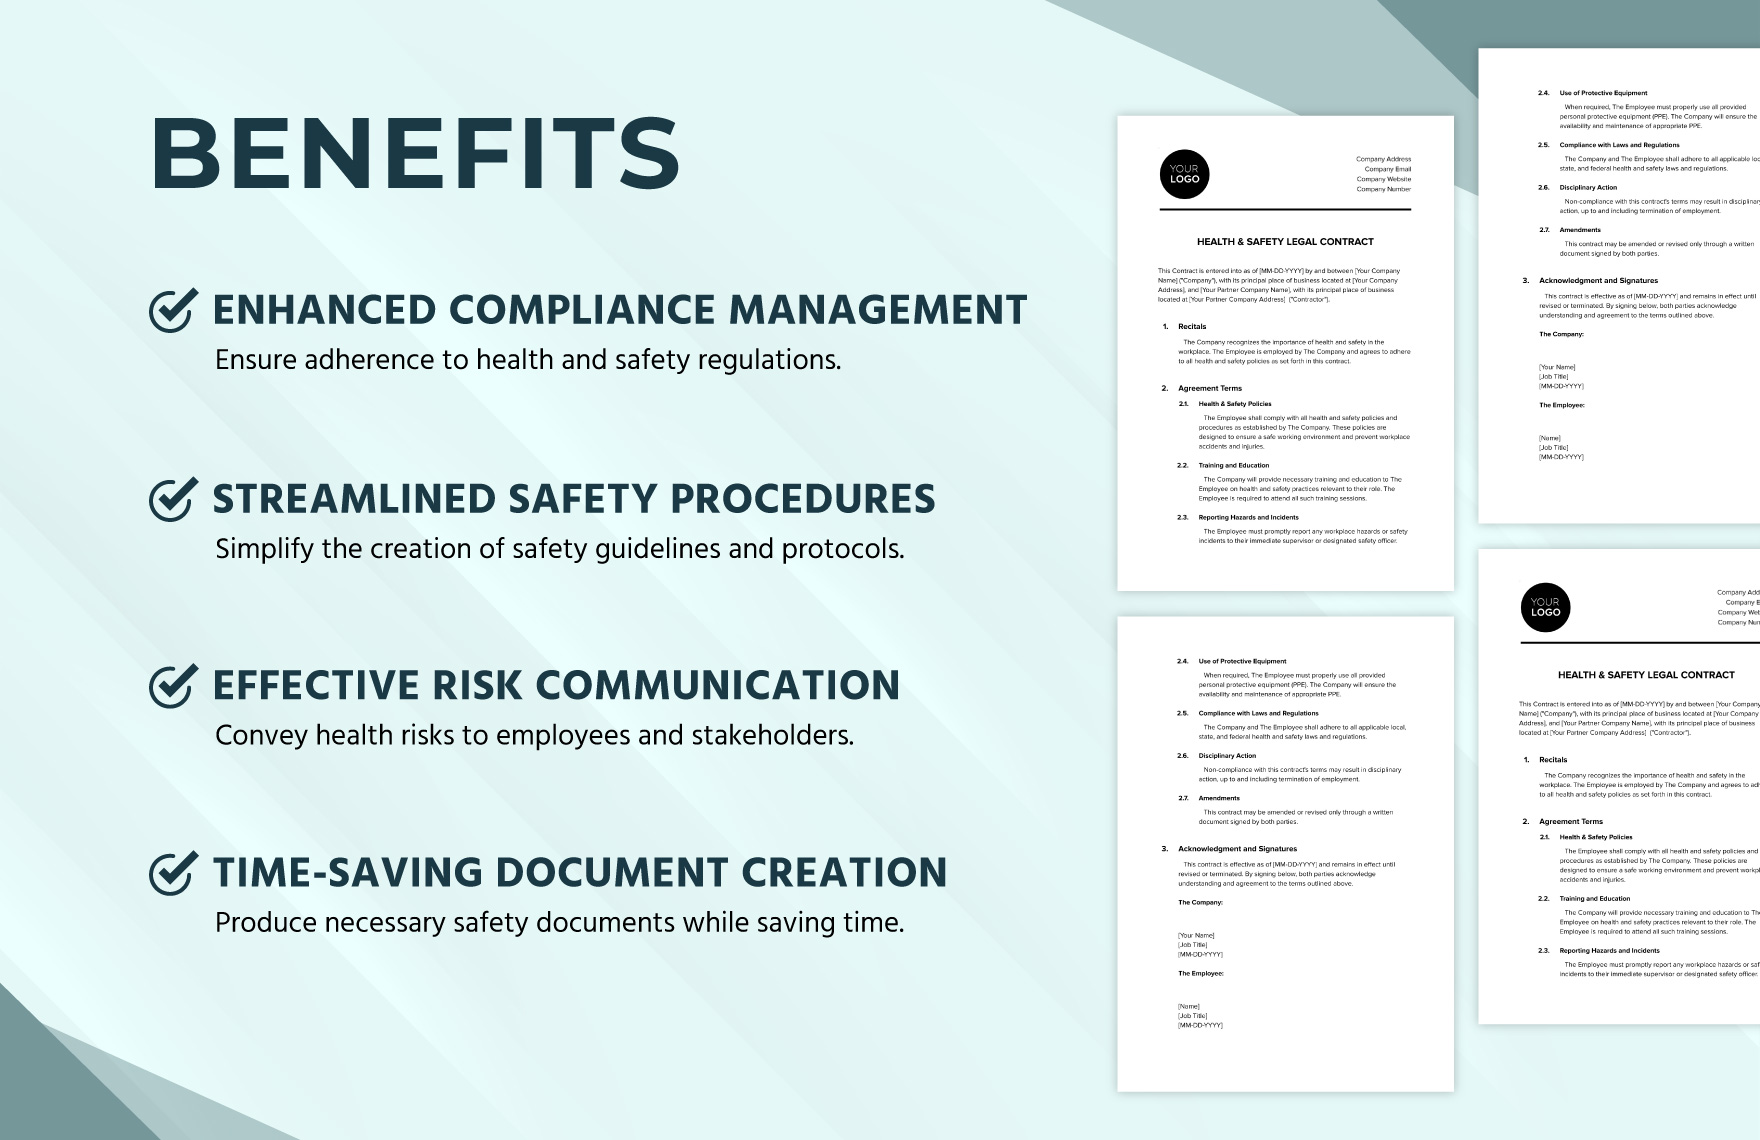 Health Safety Legal Contract Template